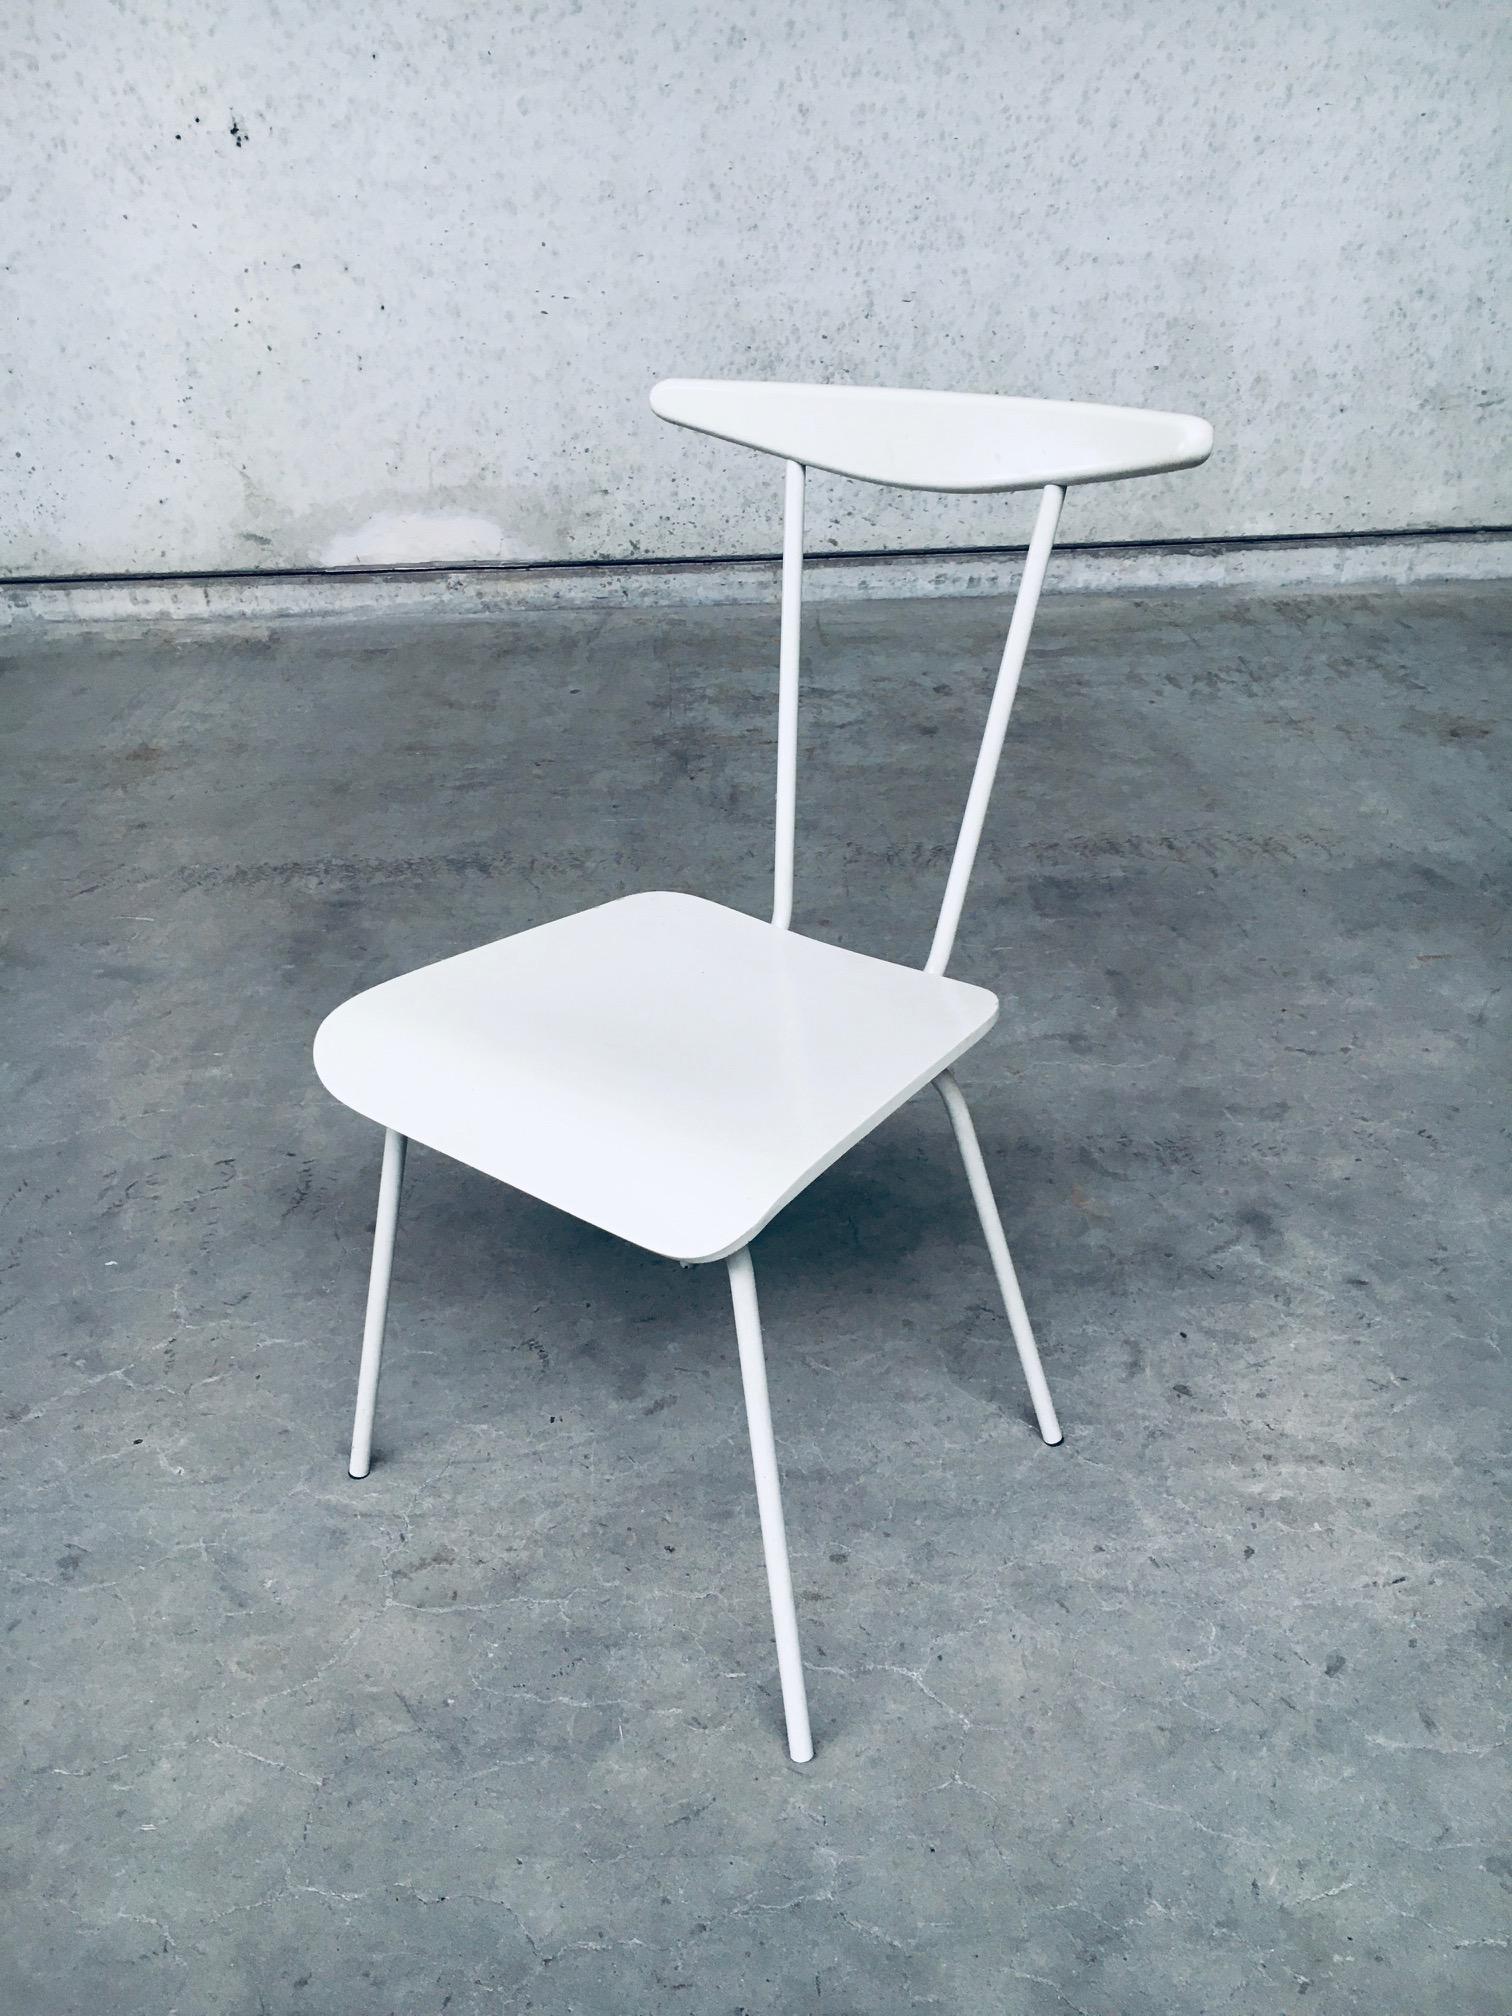 Vintage Mid-Century Modern Dutch Design Dress Boy chair by Wim Rietveld for Auping, made in the Netherlands, circa 1950's. Metal frame with bentwood plywood seat and steerhead backrest in original light grey color. In very good original condition.